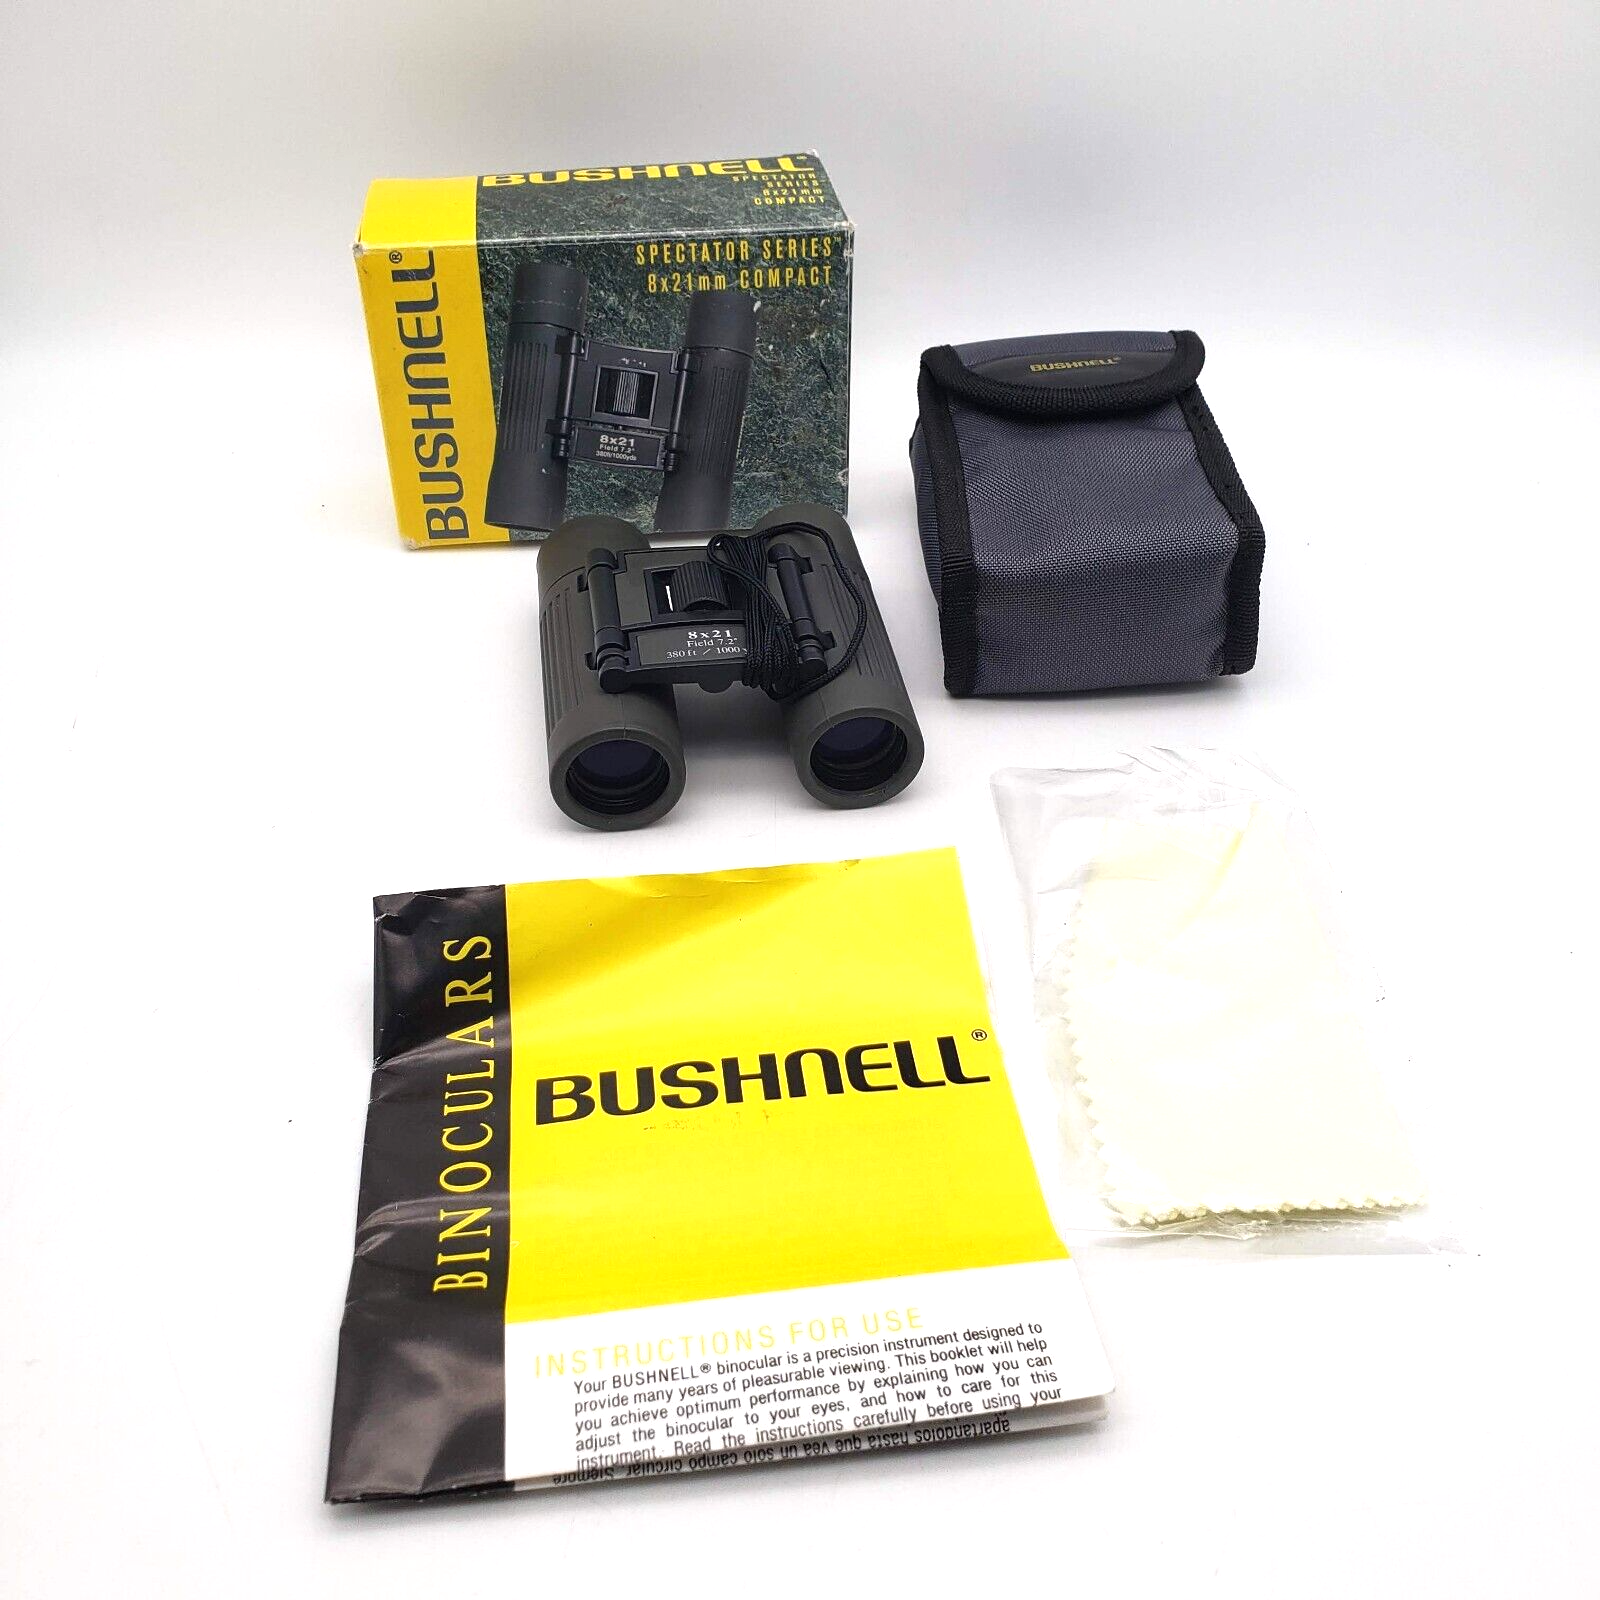 Primary image for Vintage BUSHNELL Spectator Series 8 x 21 mm Compact Binoculars w/ Case (13-8262)